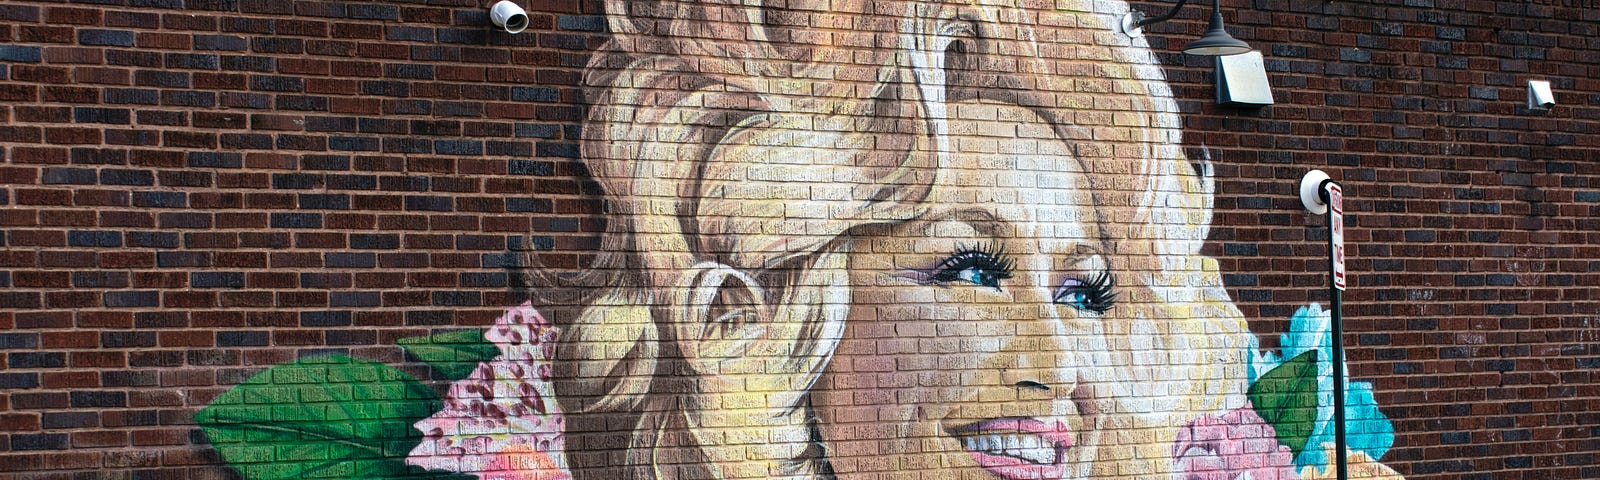 A mural of Dolly Parton is painted on a brick wall. She has bright flowers painted behind her.